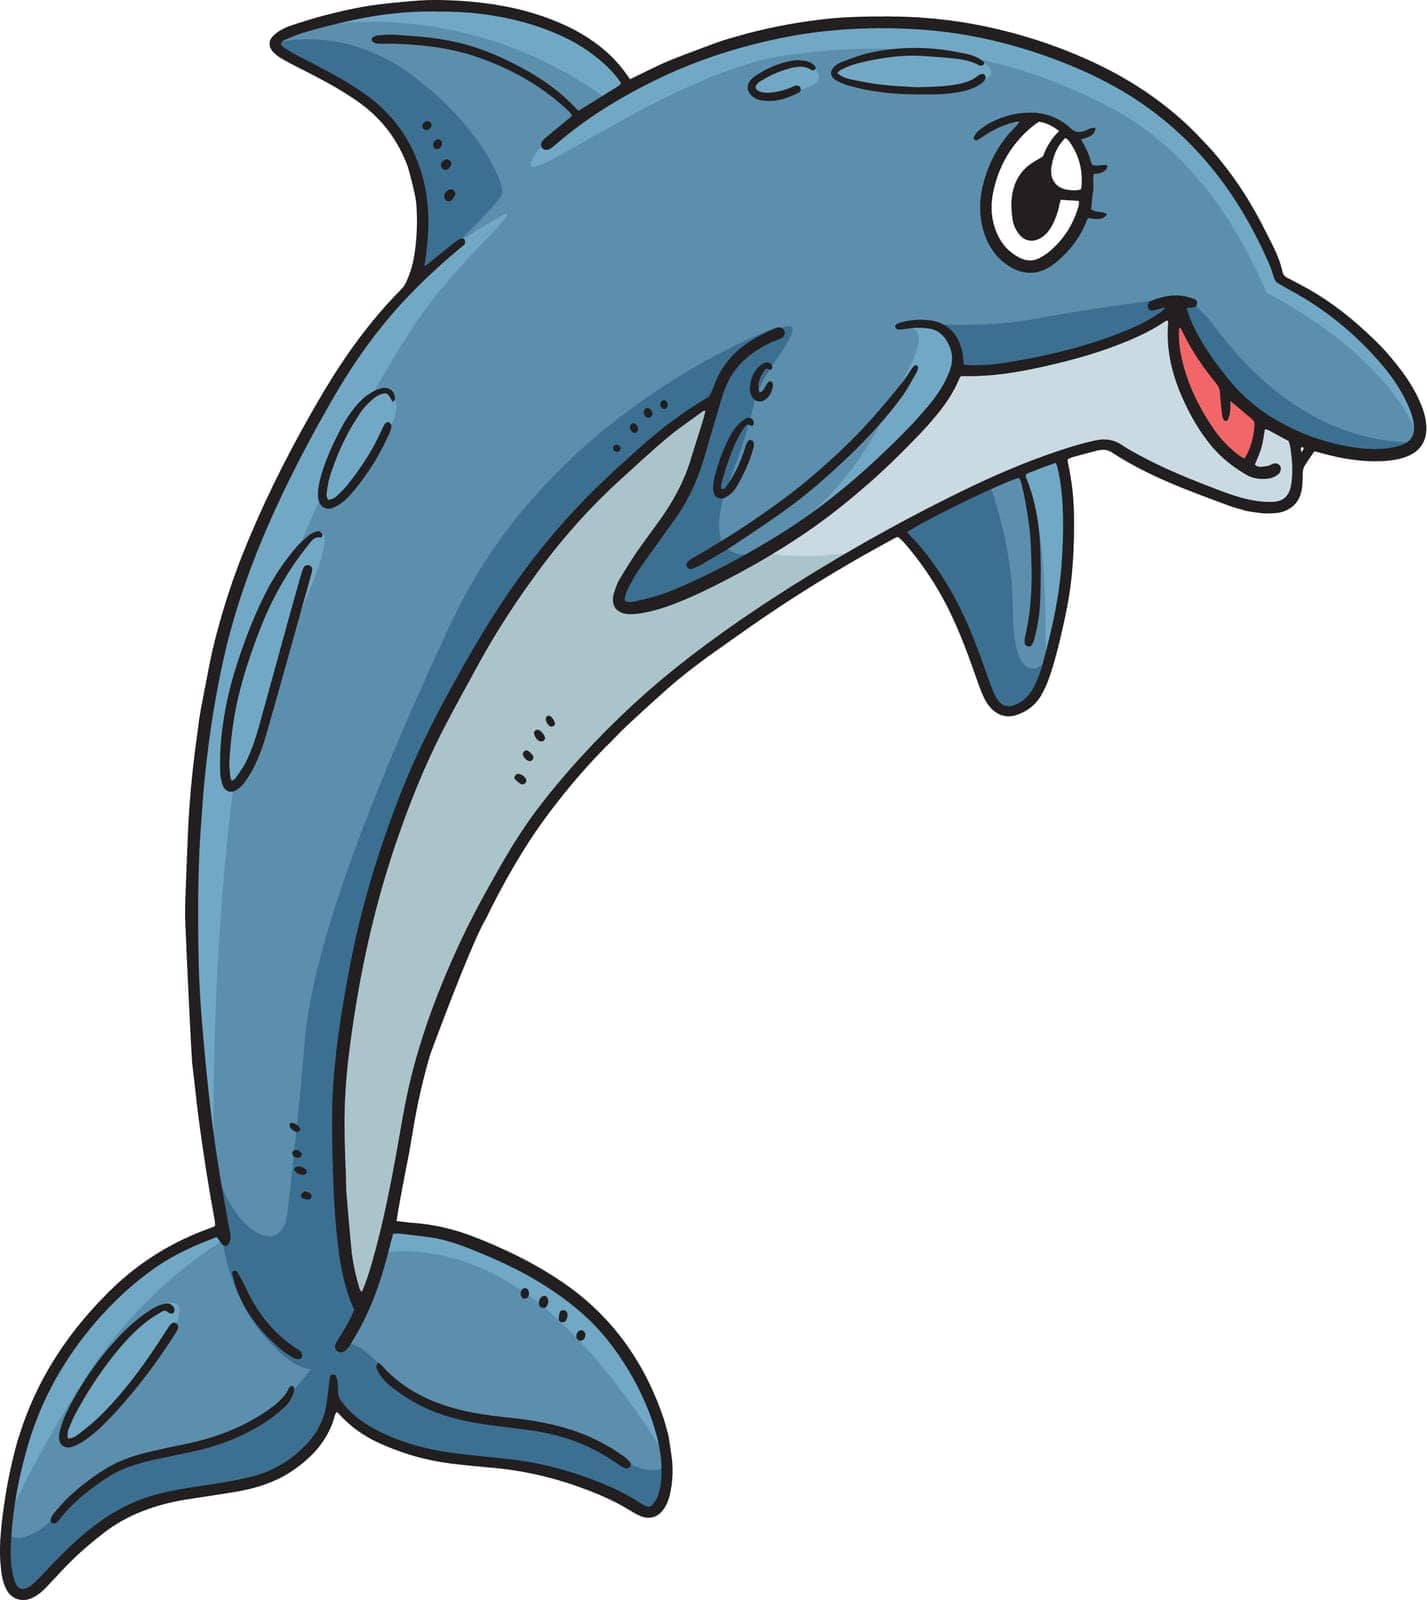 Dolphin Jumping Out Cartoon Colored Clipart by abbydesign